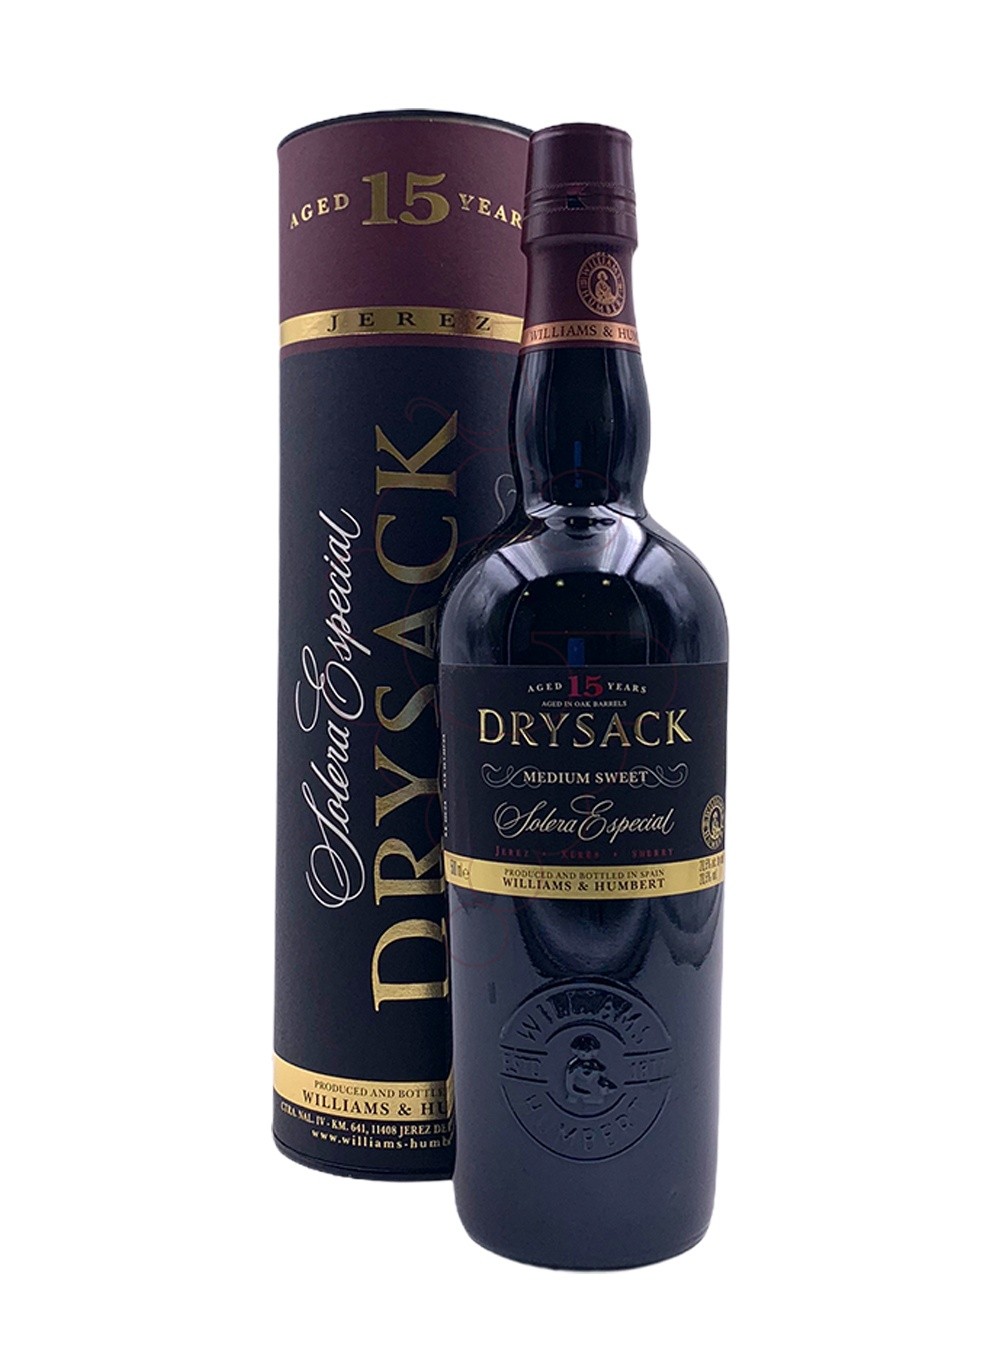 Photo Dry Sack Solera Especial 15 Years fortified wine